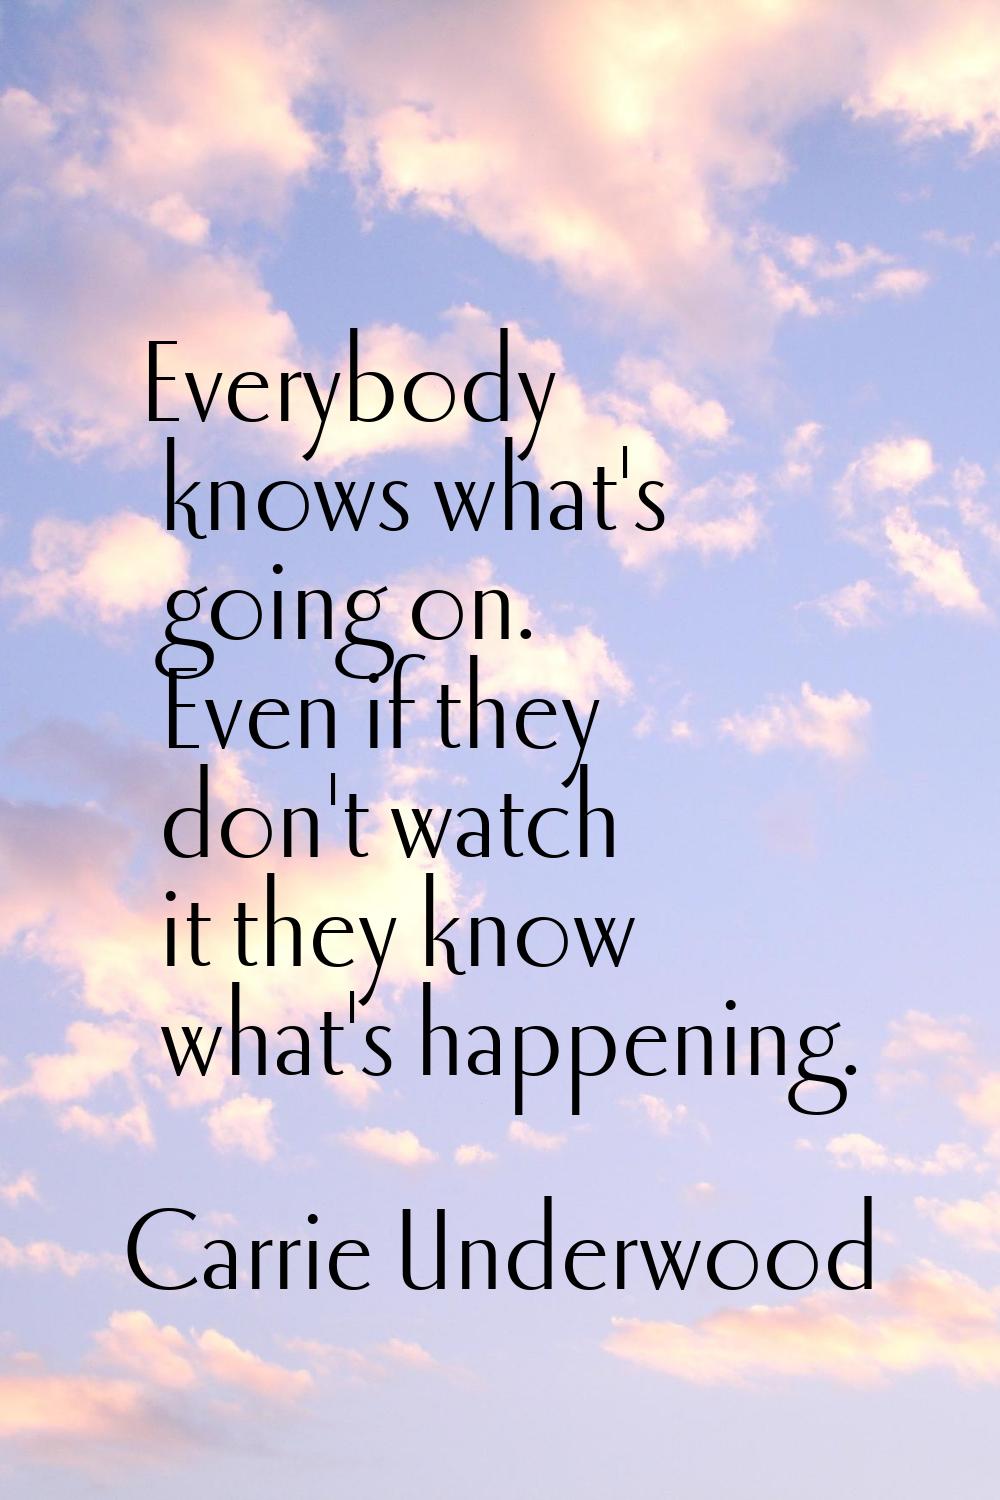 Everybody knows what's going on. Even if they don't watch it they know what's happening.